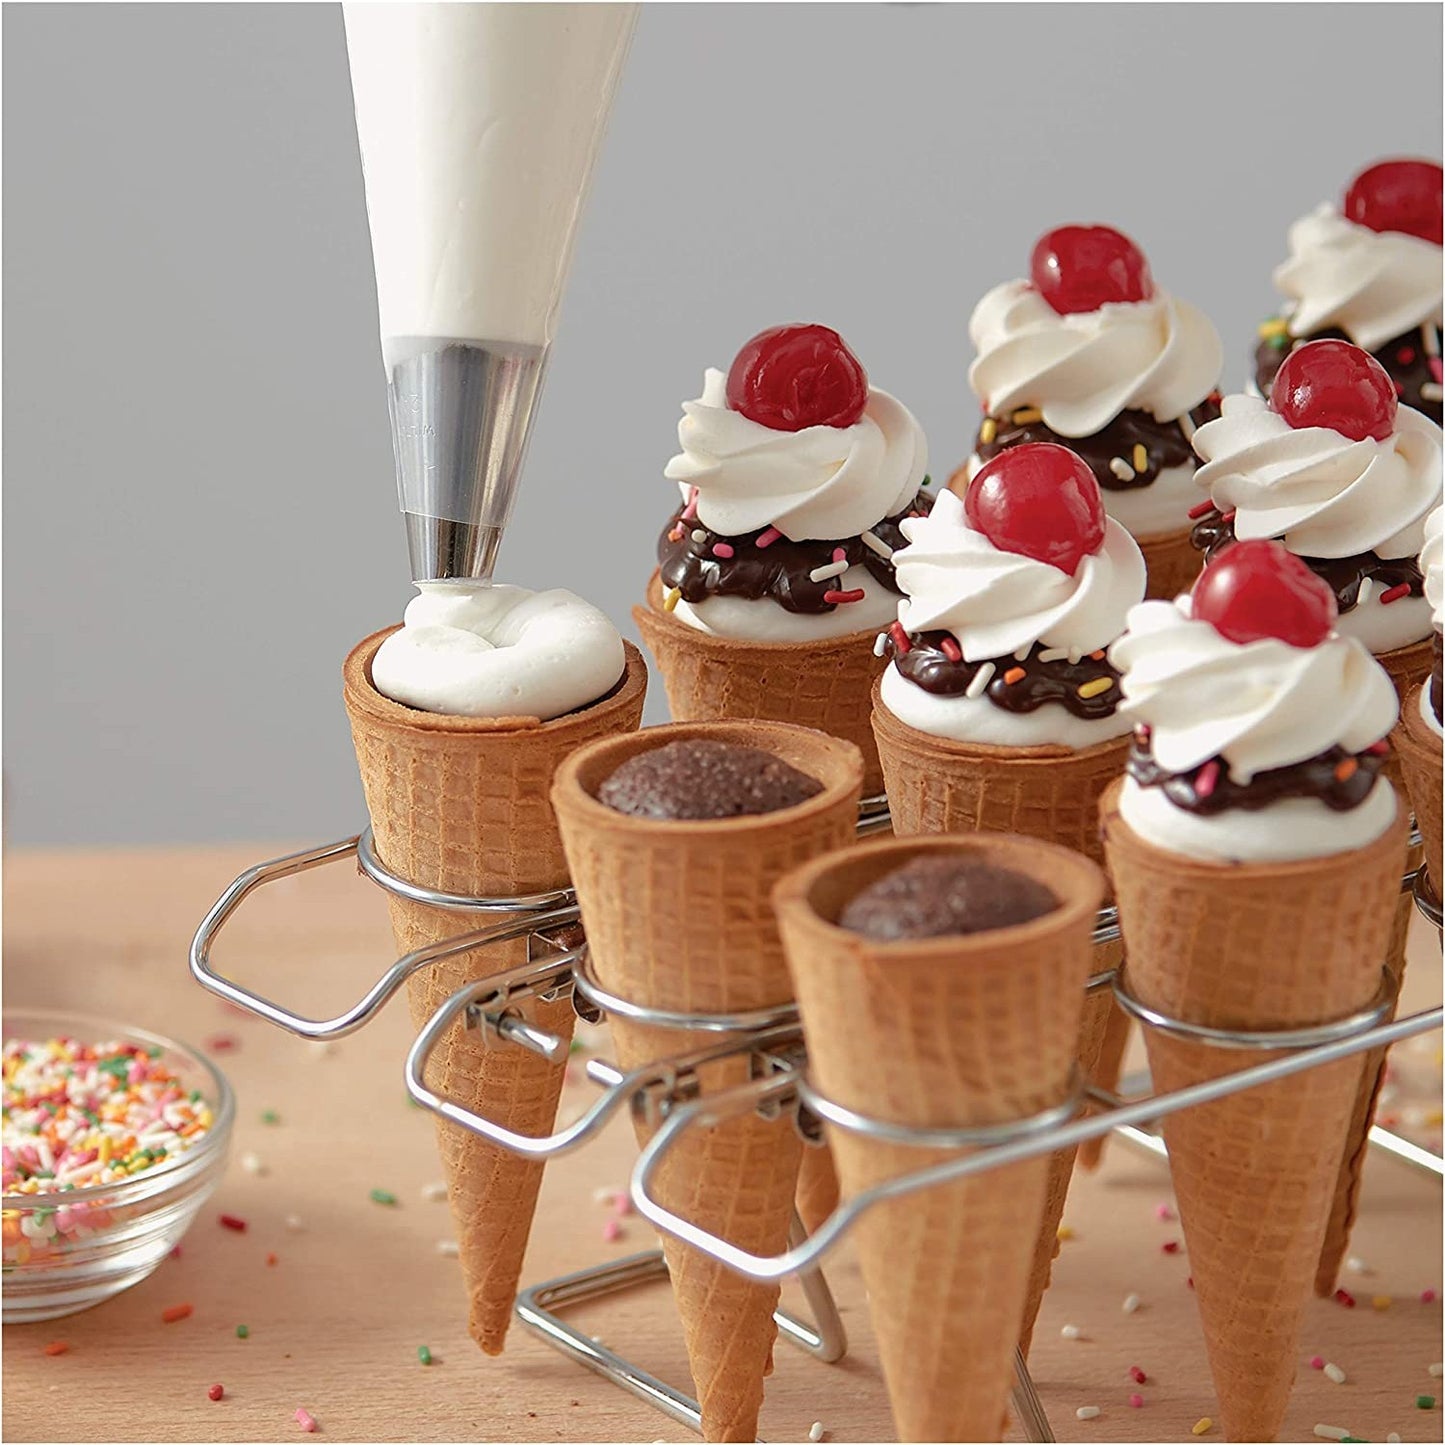 A cupcake cone baking rack filled with sweet treats.